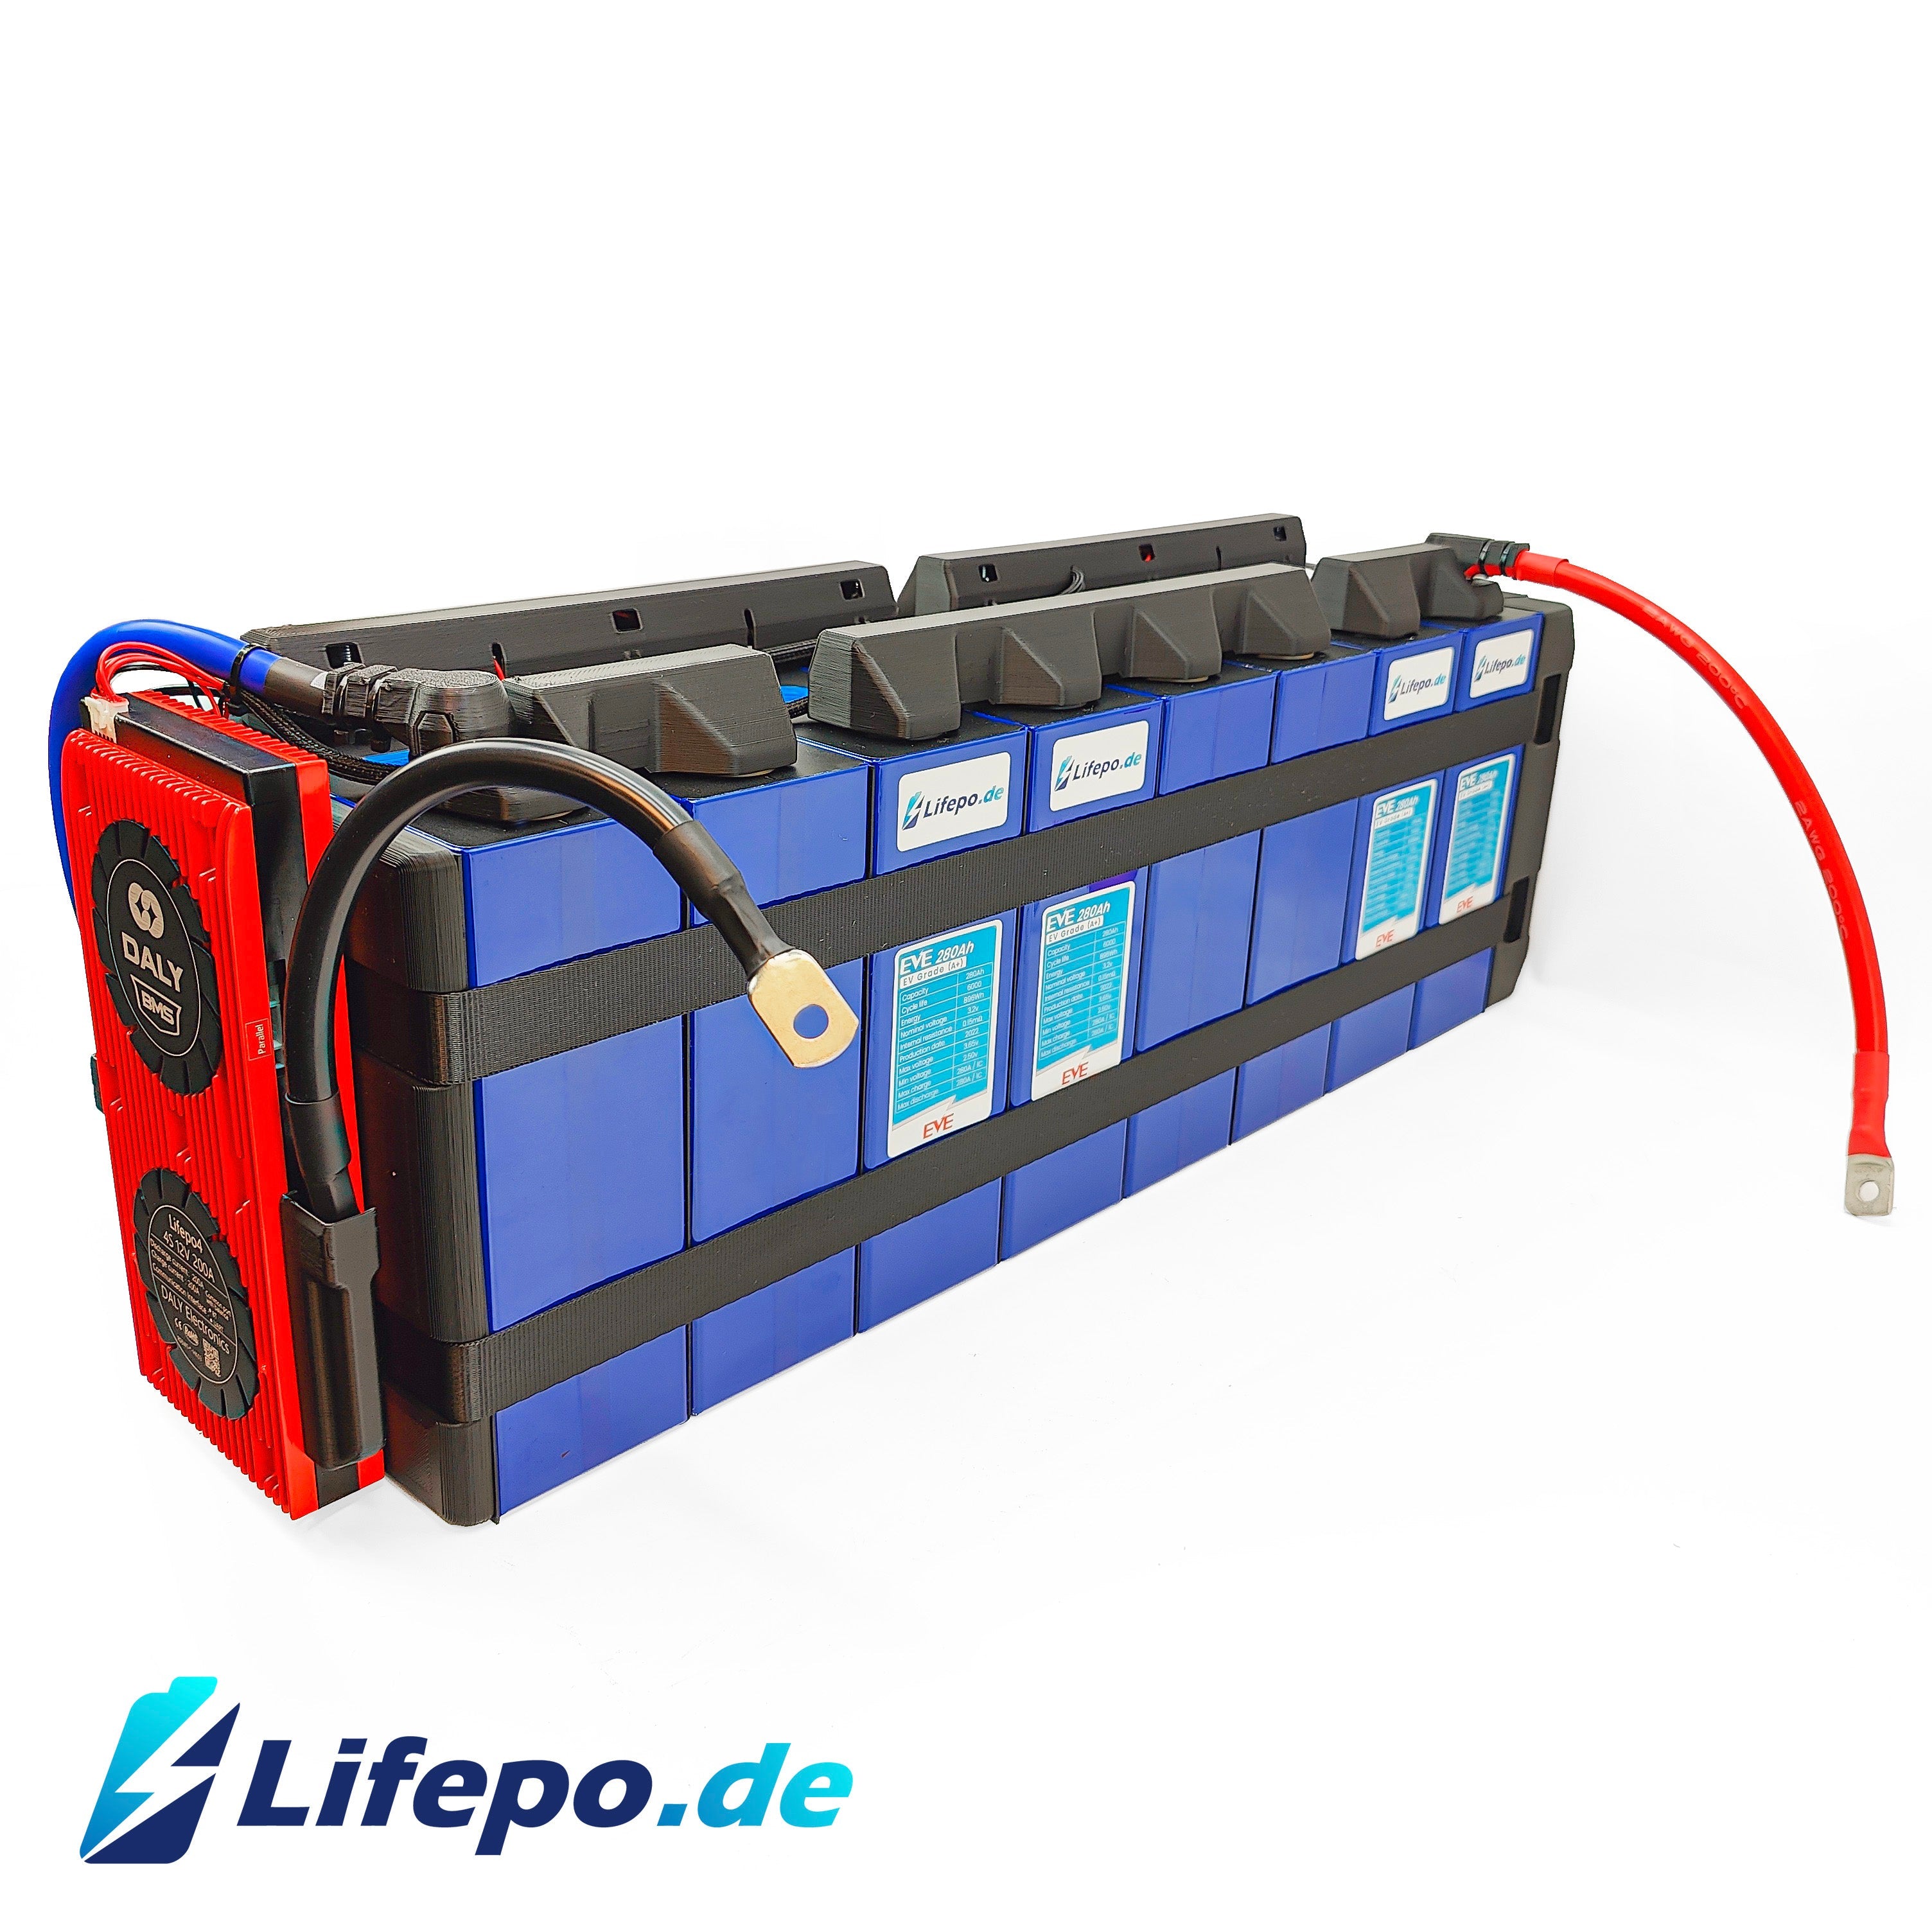 24v 560Ah Lifepo4 battery system with EVE Grade A+ 15.2kWh –